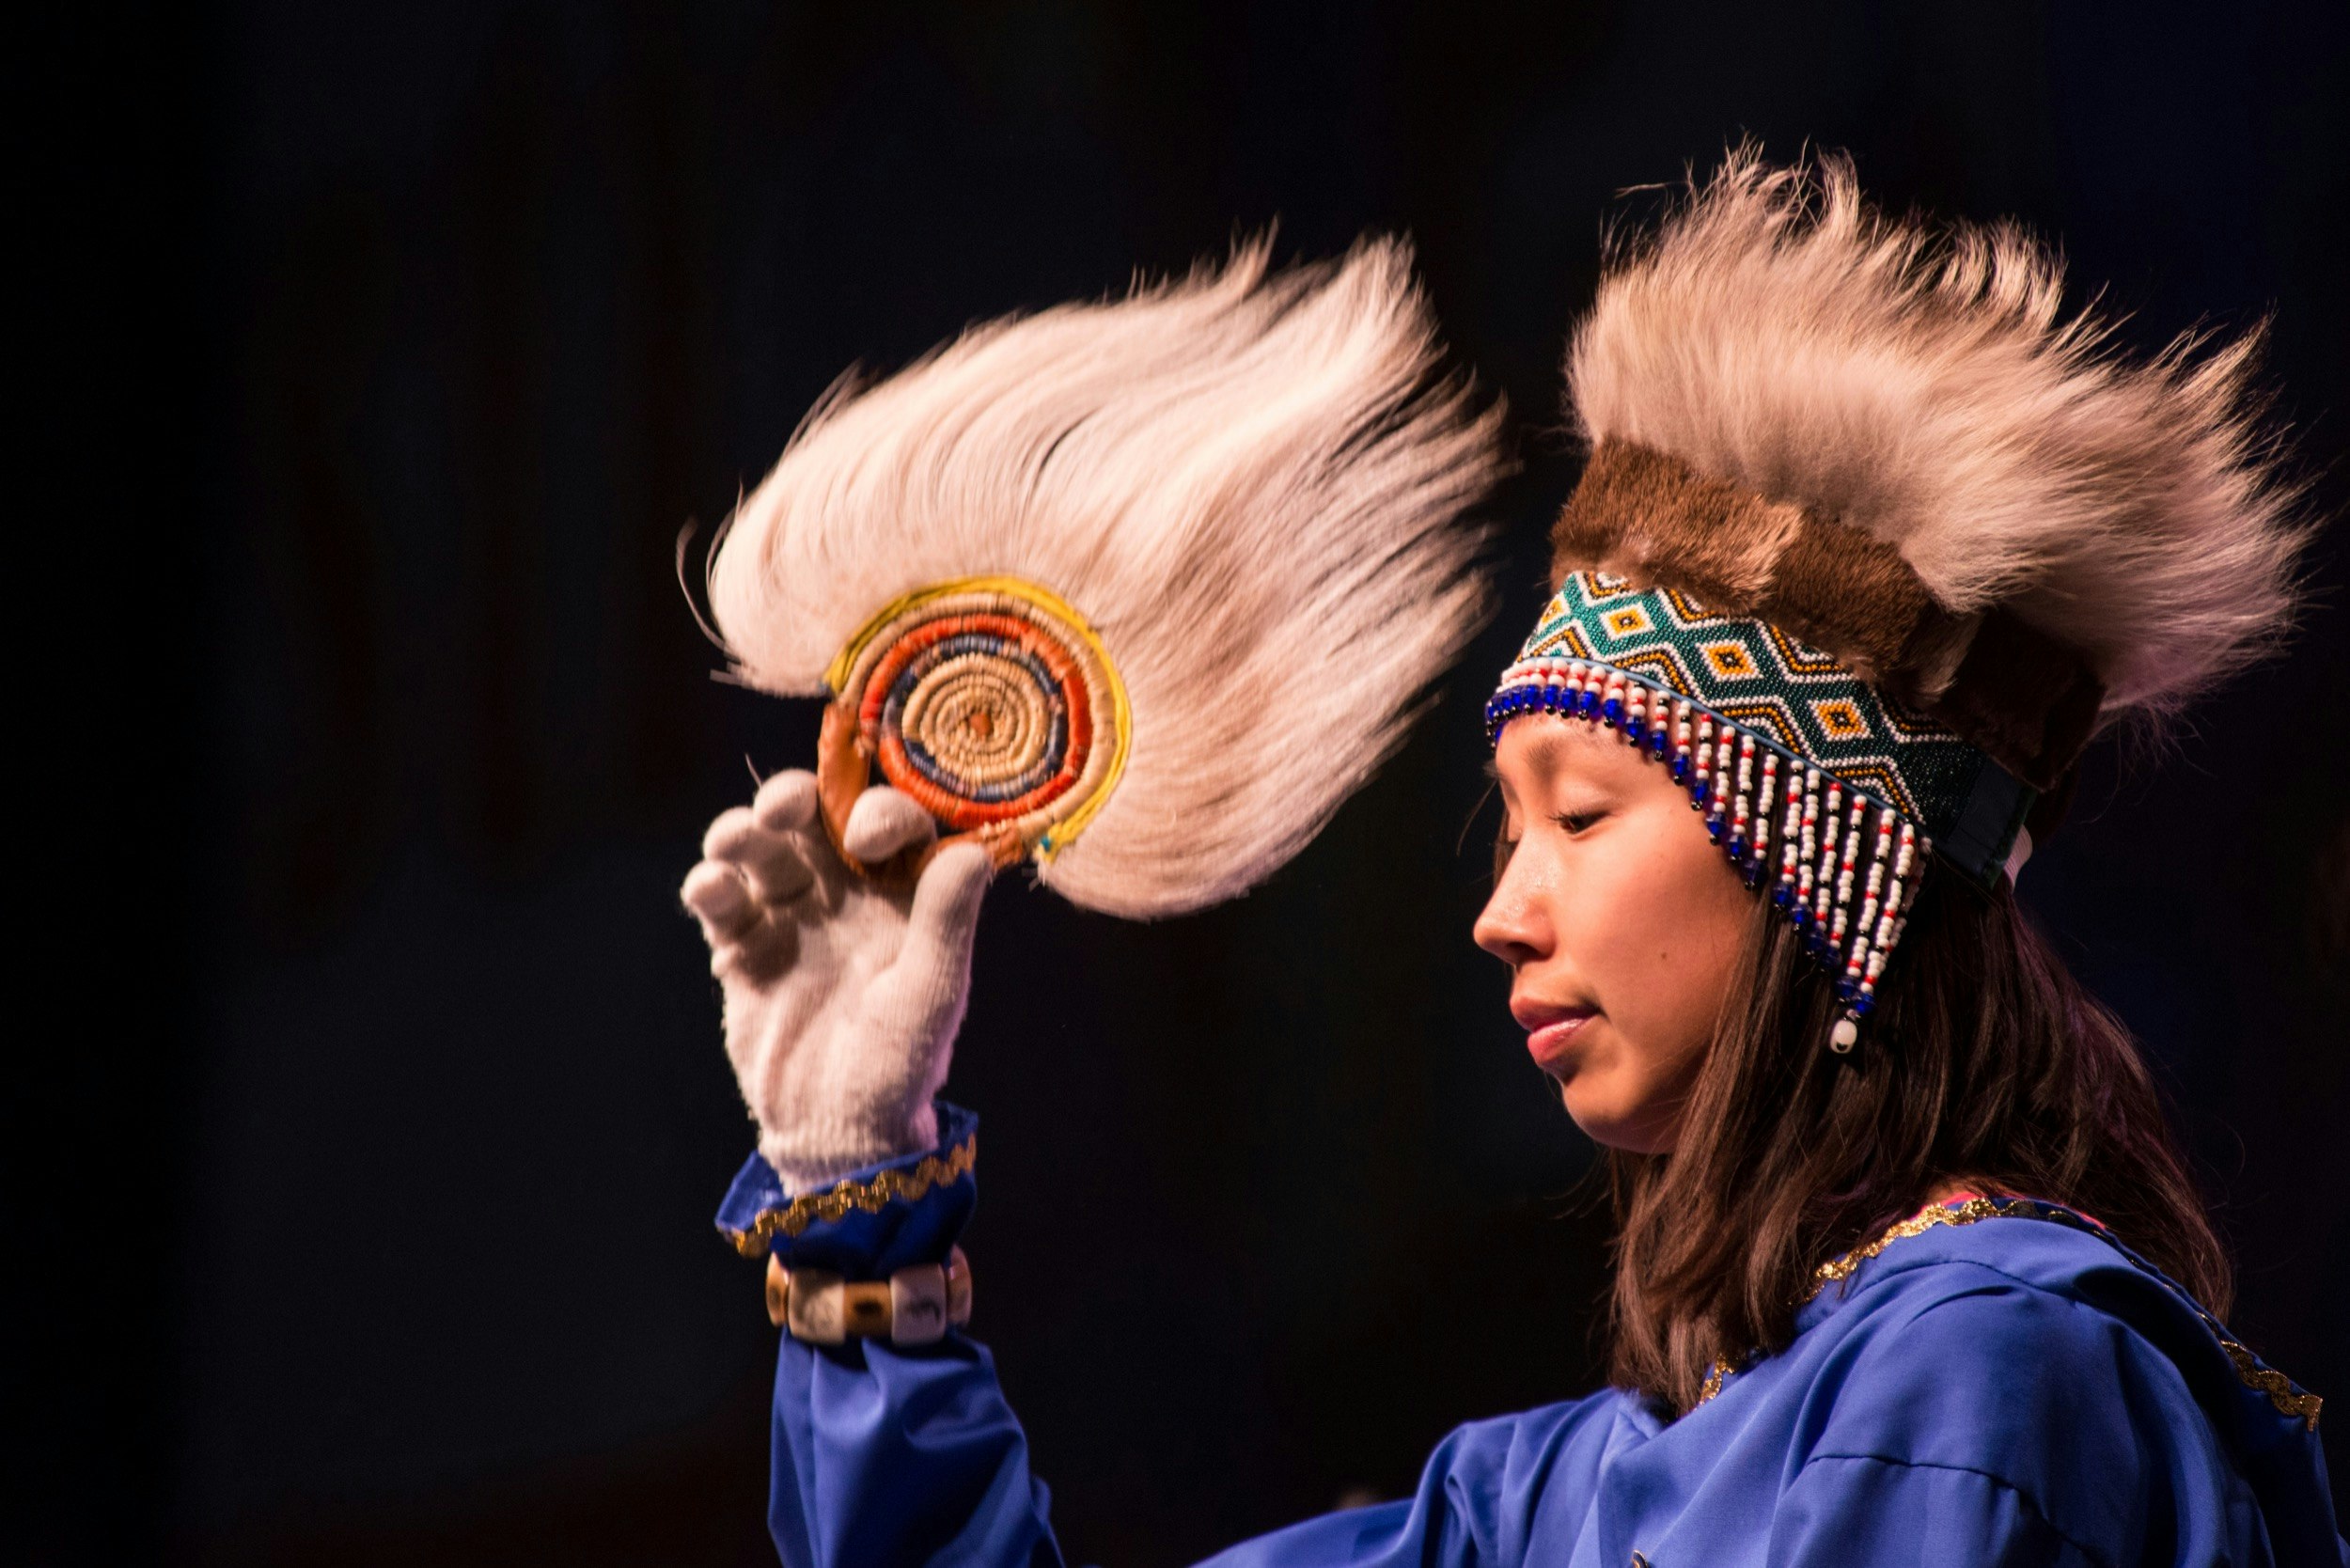 An Alaska Native does a traditional dance on a black background